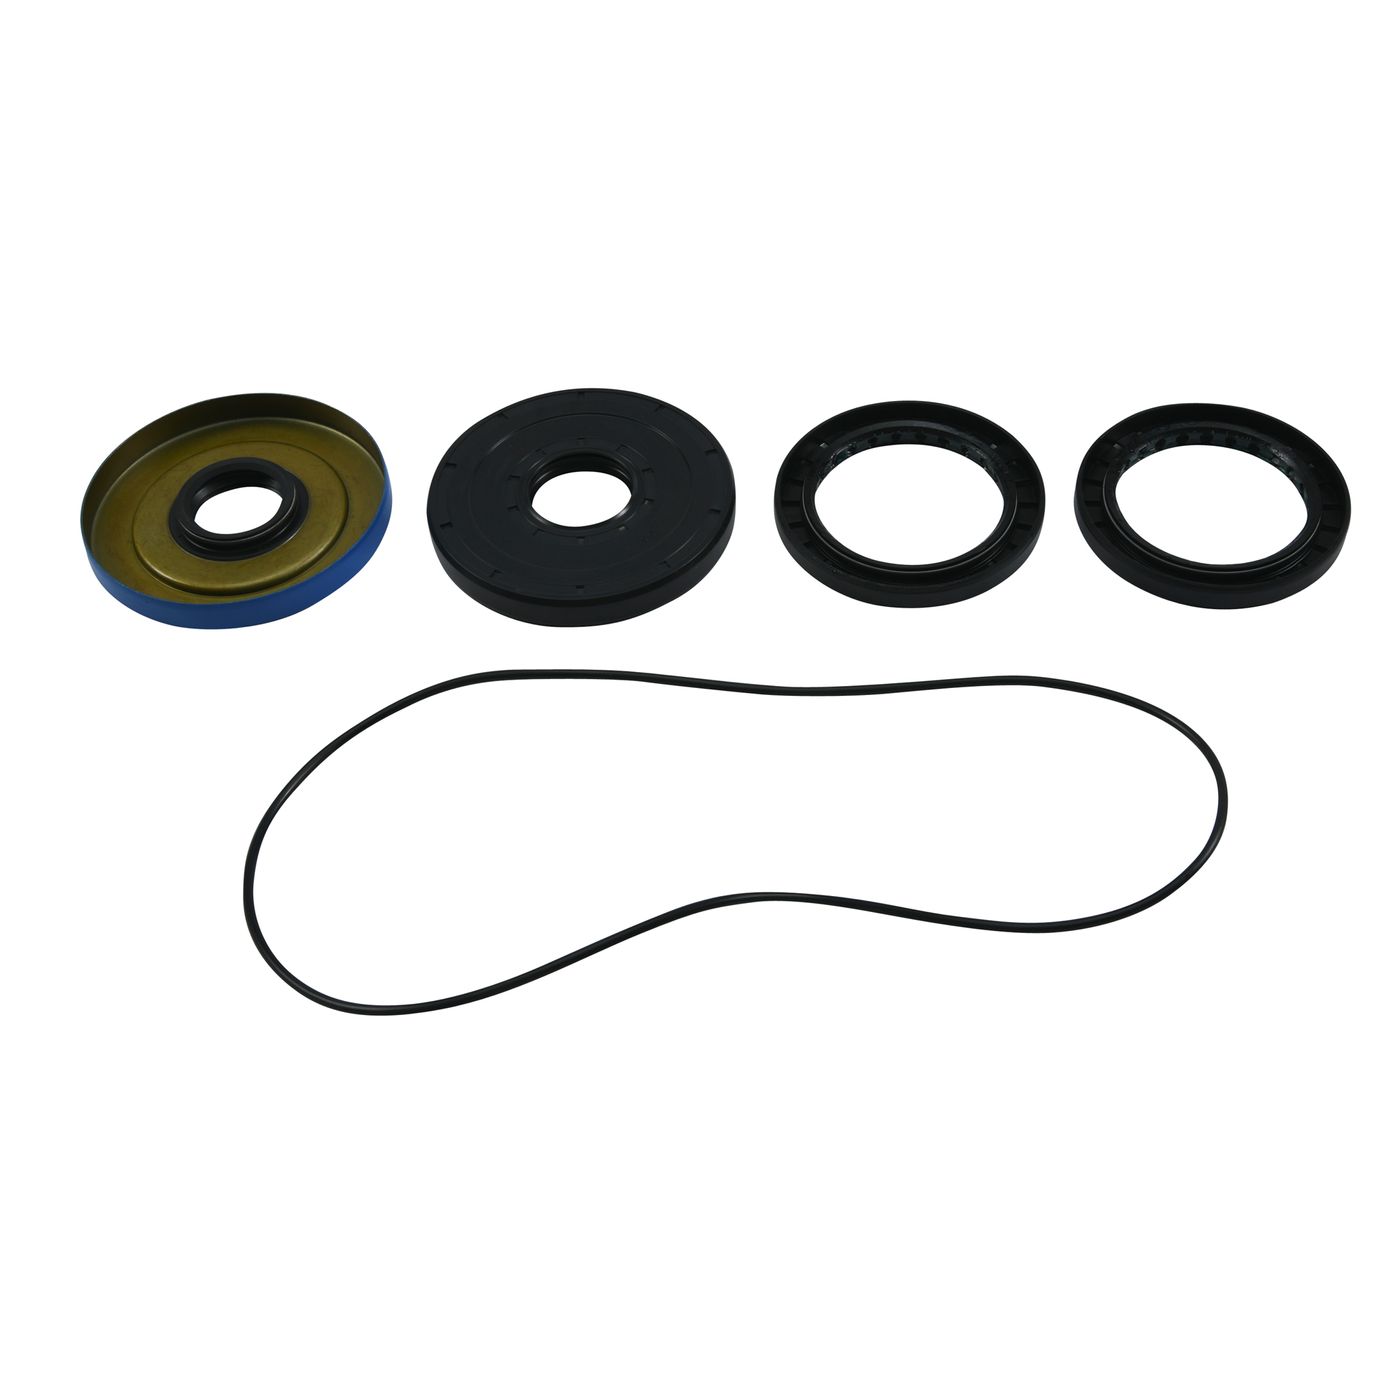 Wrp Diff Seal Kits - WRP252057-5 image